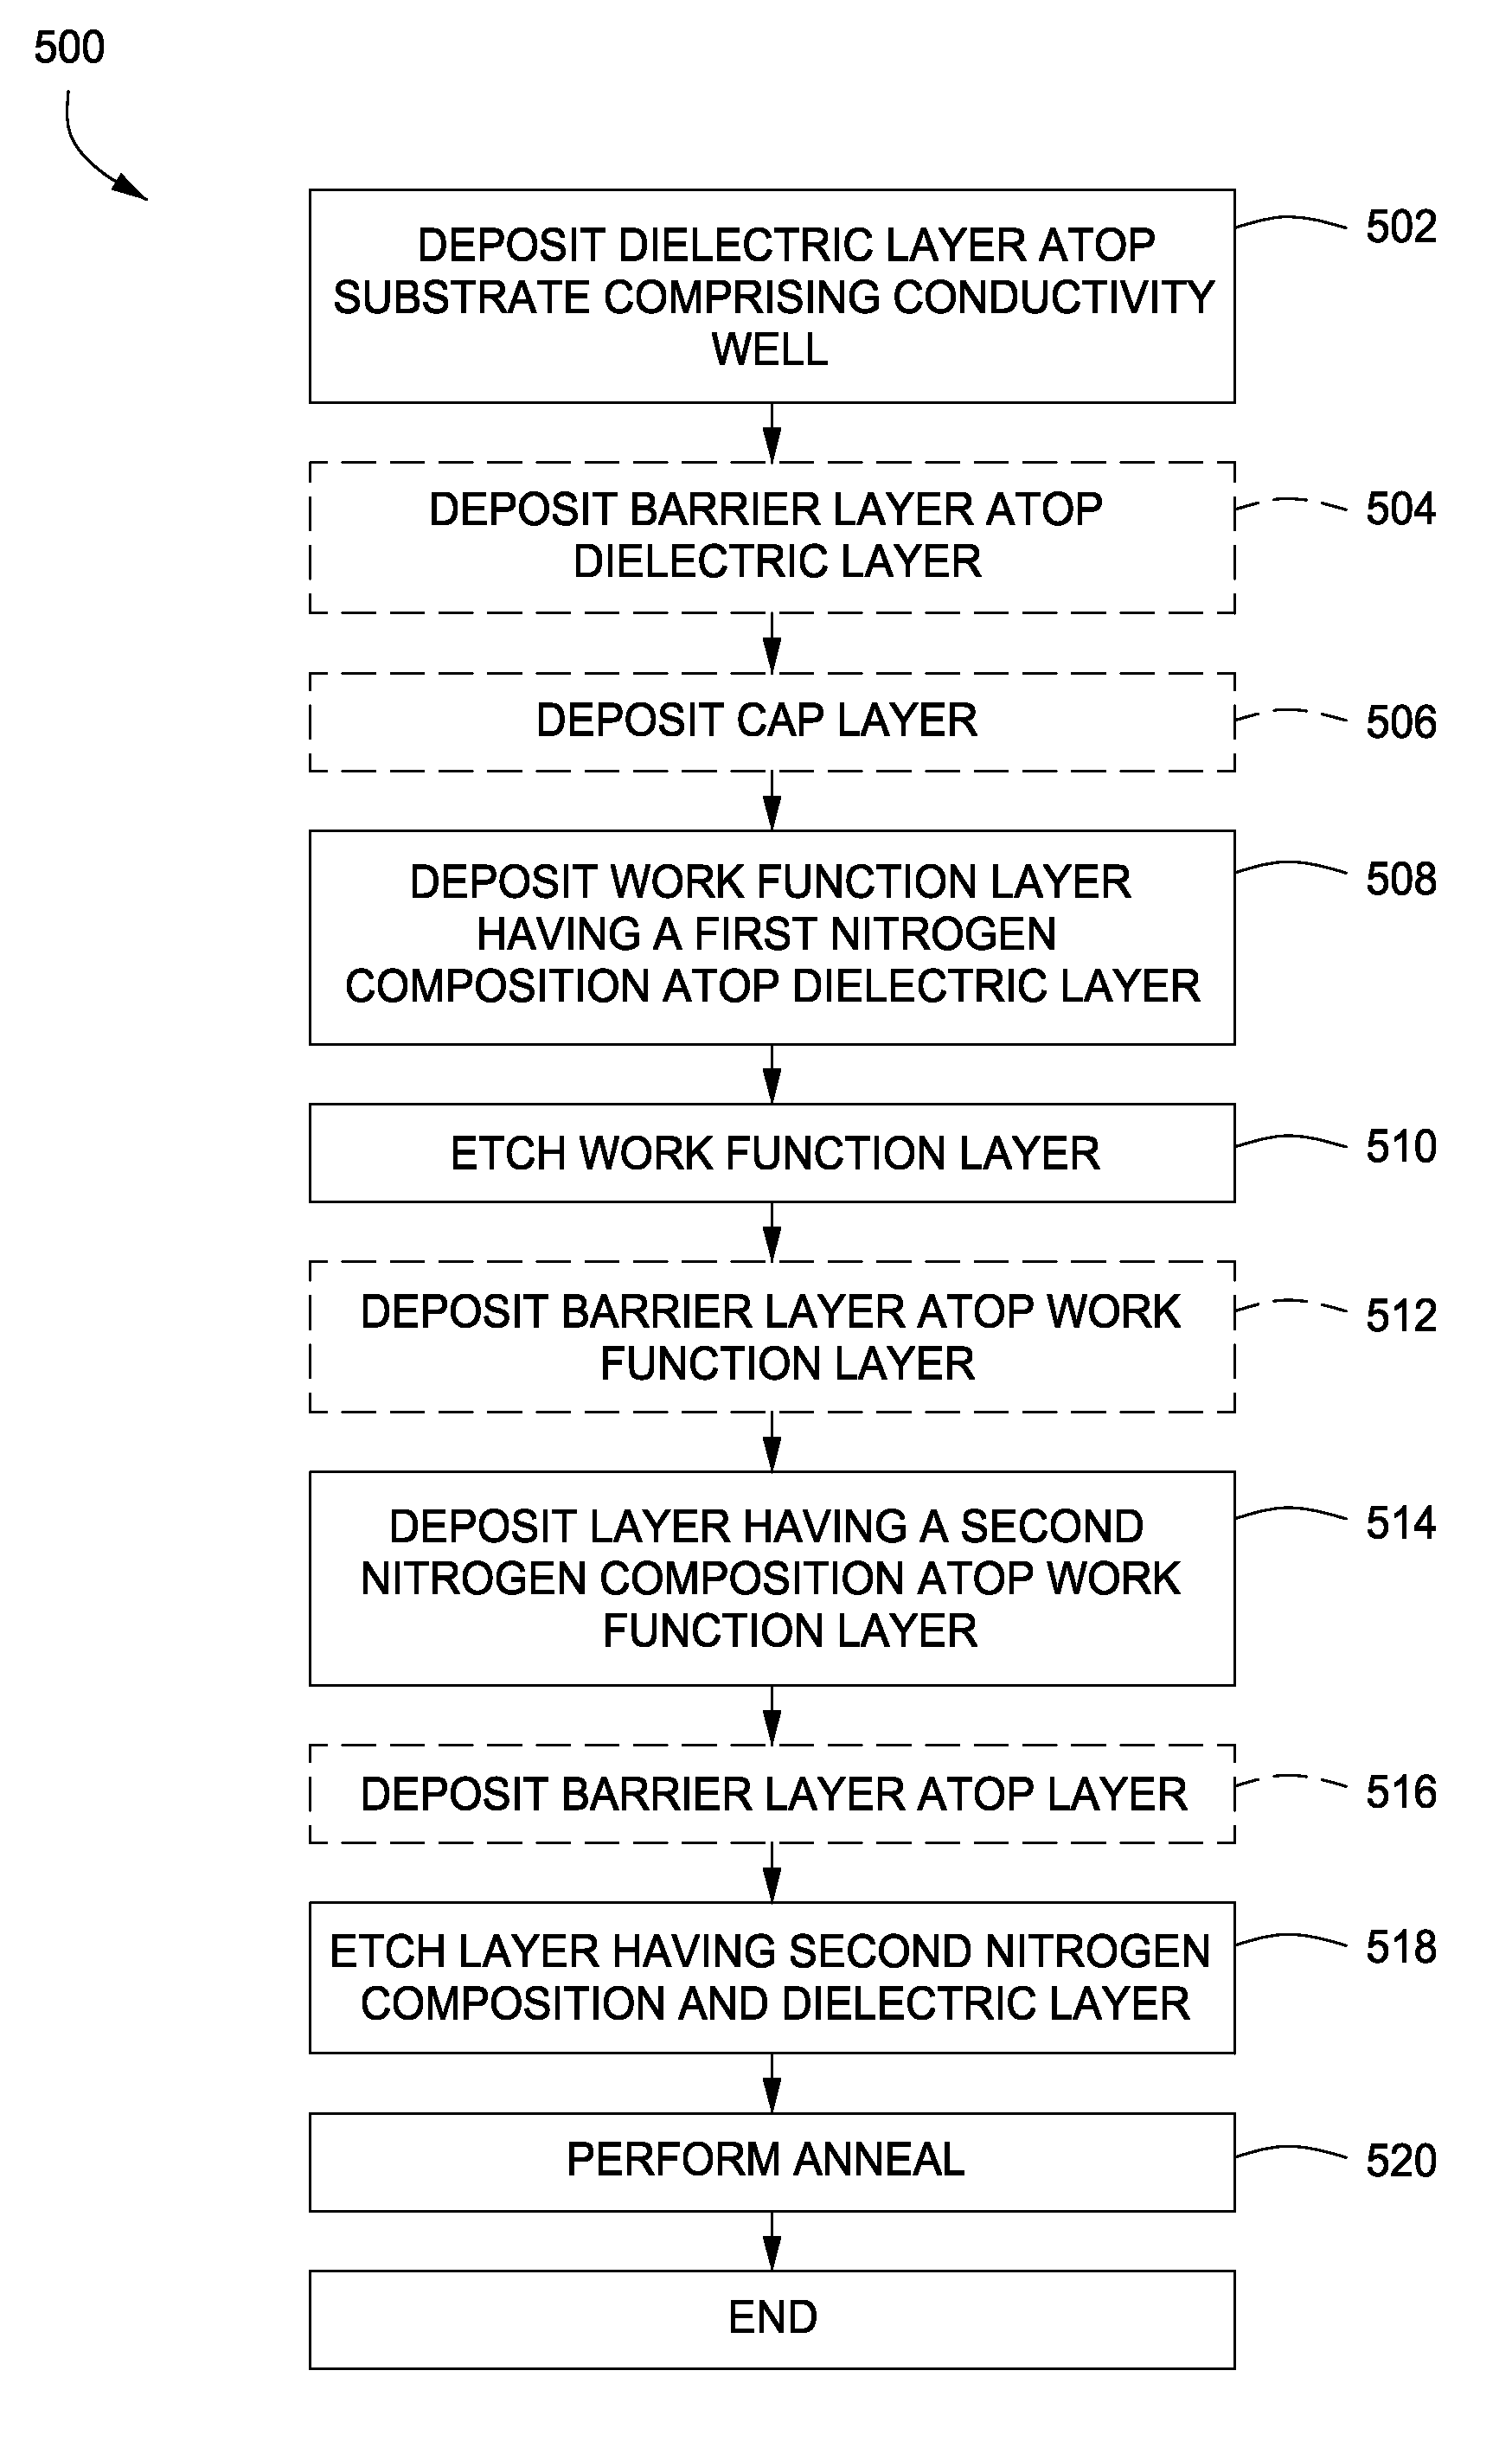 Substrate device having a tuned work function and methods of forming thereof